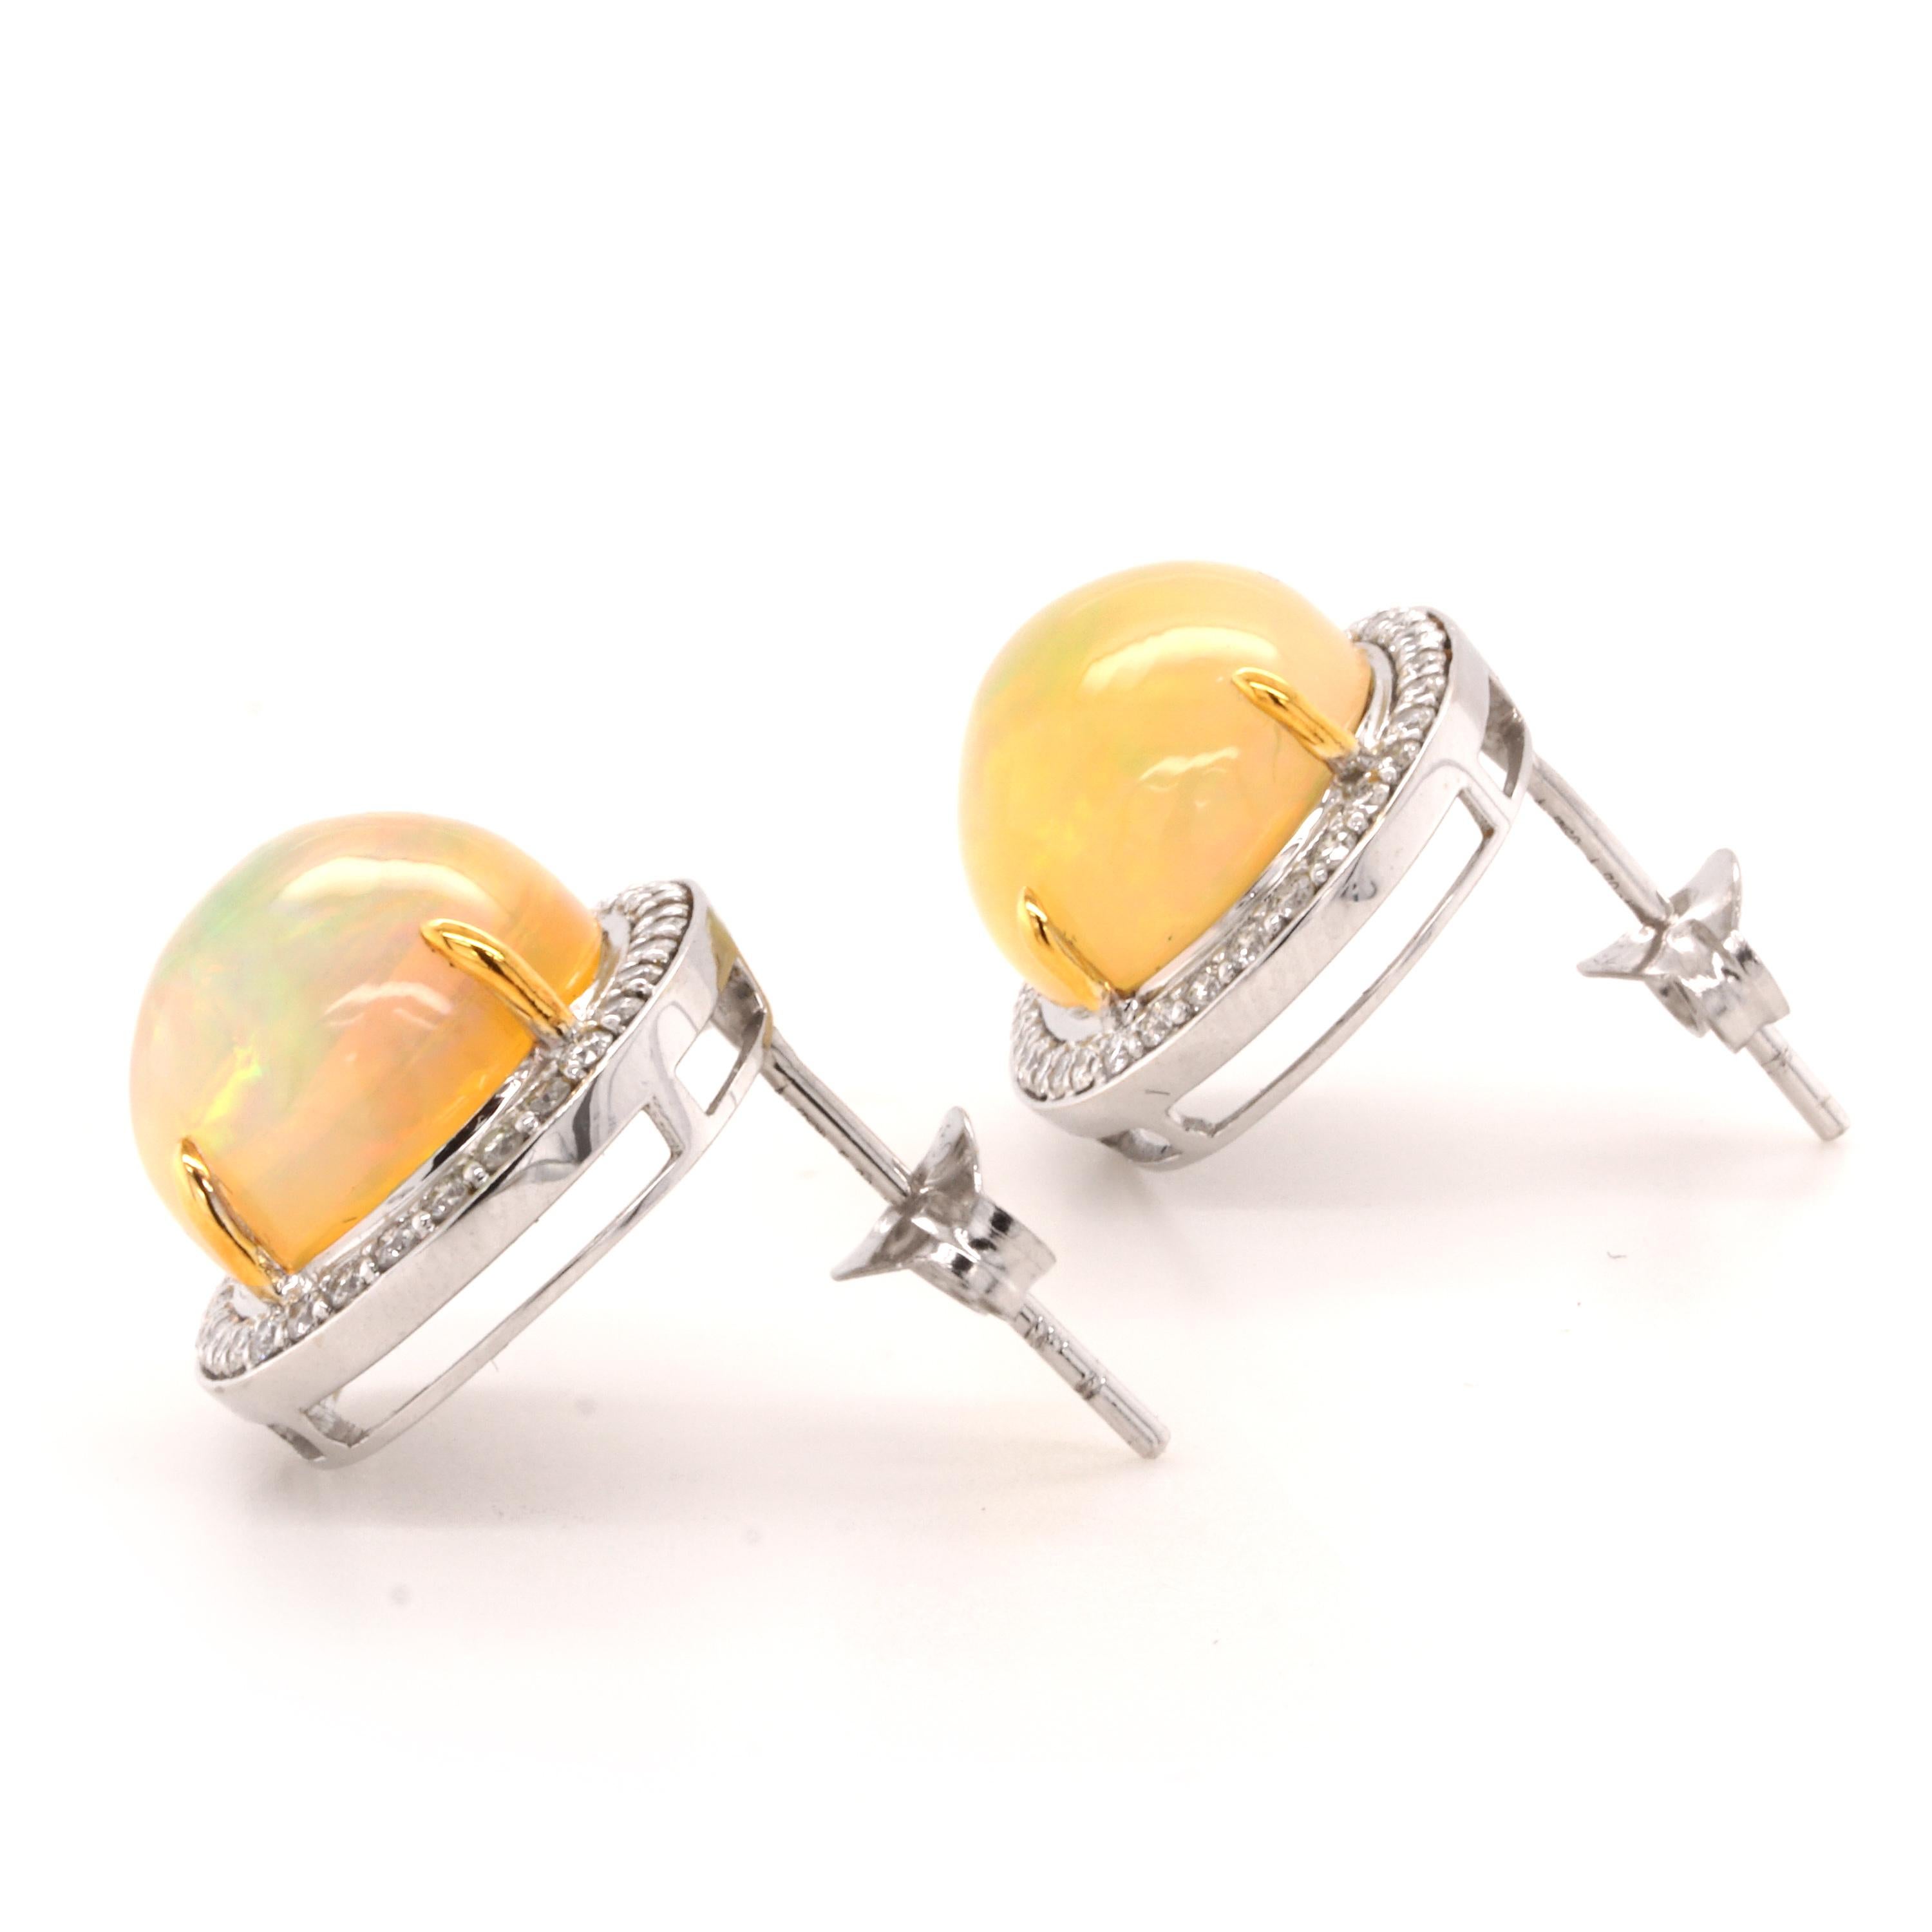 Each horizontal opal is carefully selected for its exceptional play of colours, radiating an ethereal glow that captures the essence of natural wonder. As light dances across the opal's surface, vibrant hues of blues, greens, and fiery oranges come